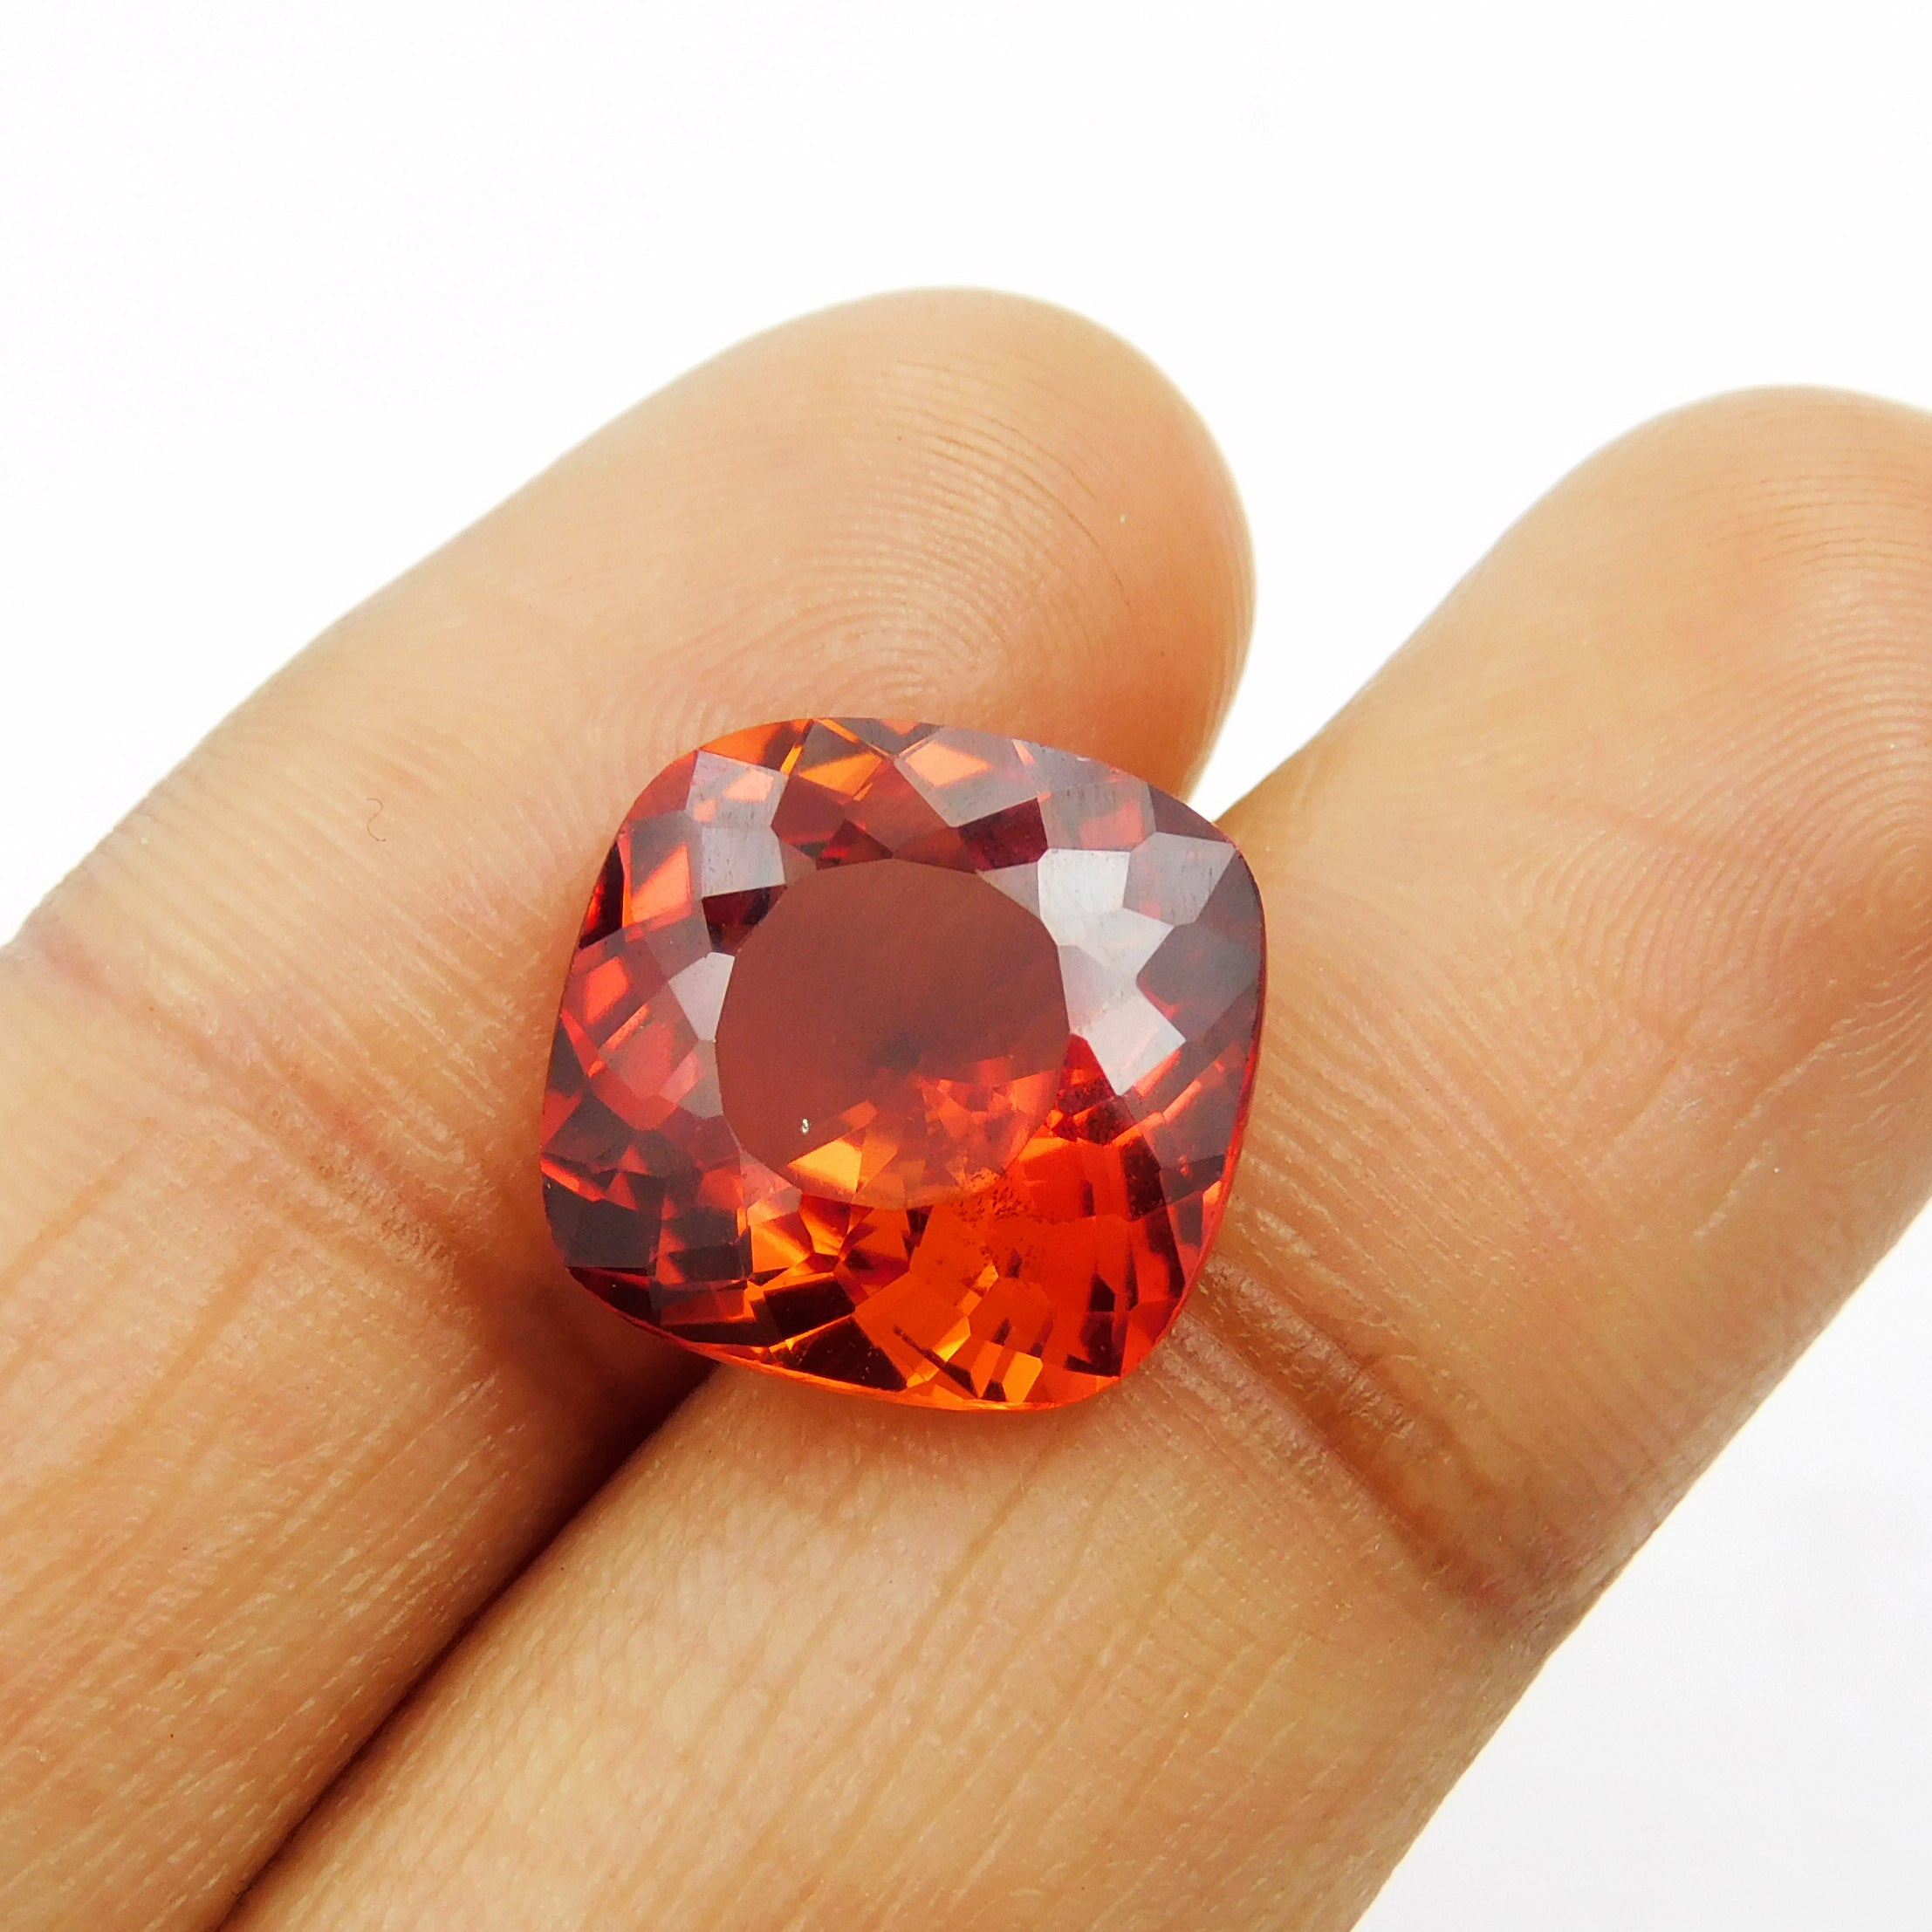 Mini Cut Stone For Earrings/ Necklace 7.25 Carat Square Cushion Cut Natural Sapphire Orange Certified Loose Gemstone / Sapphire Jwelery / Faceted Sapphire